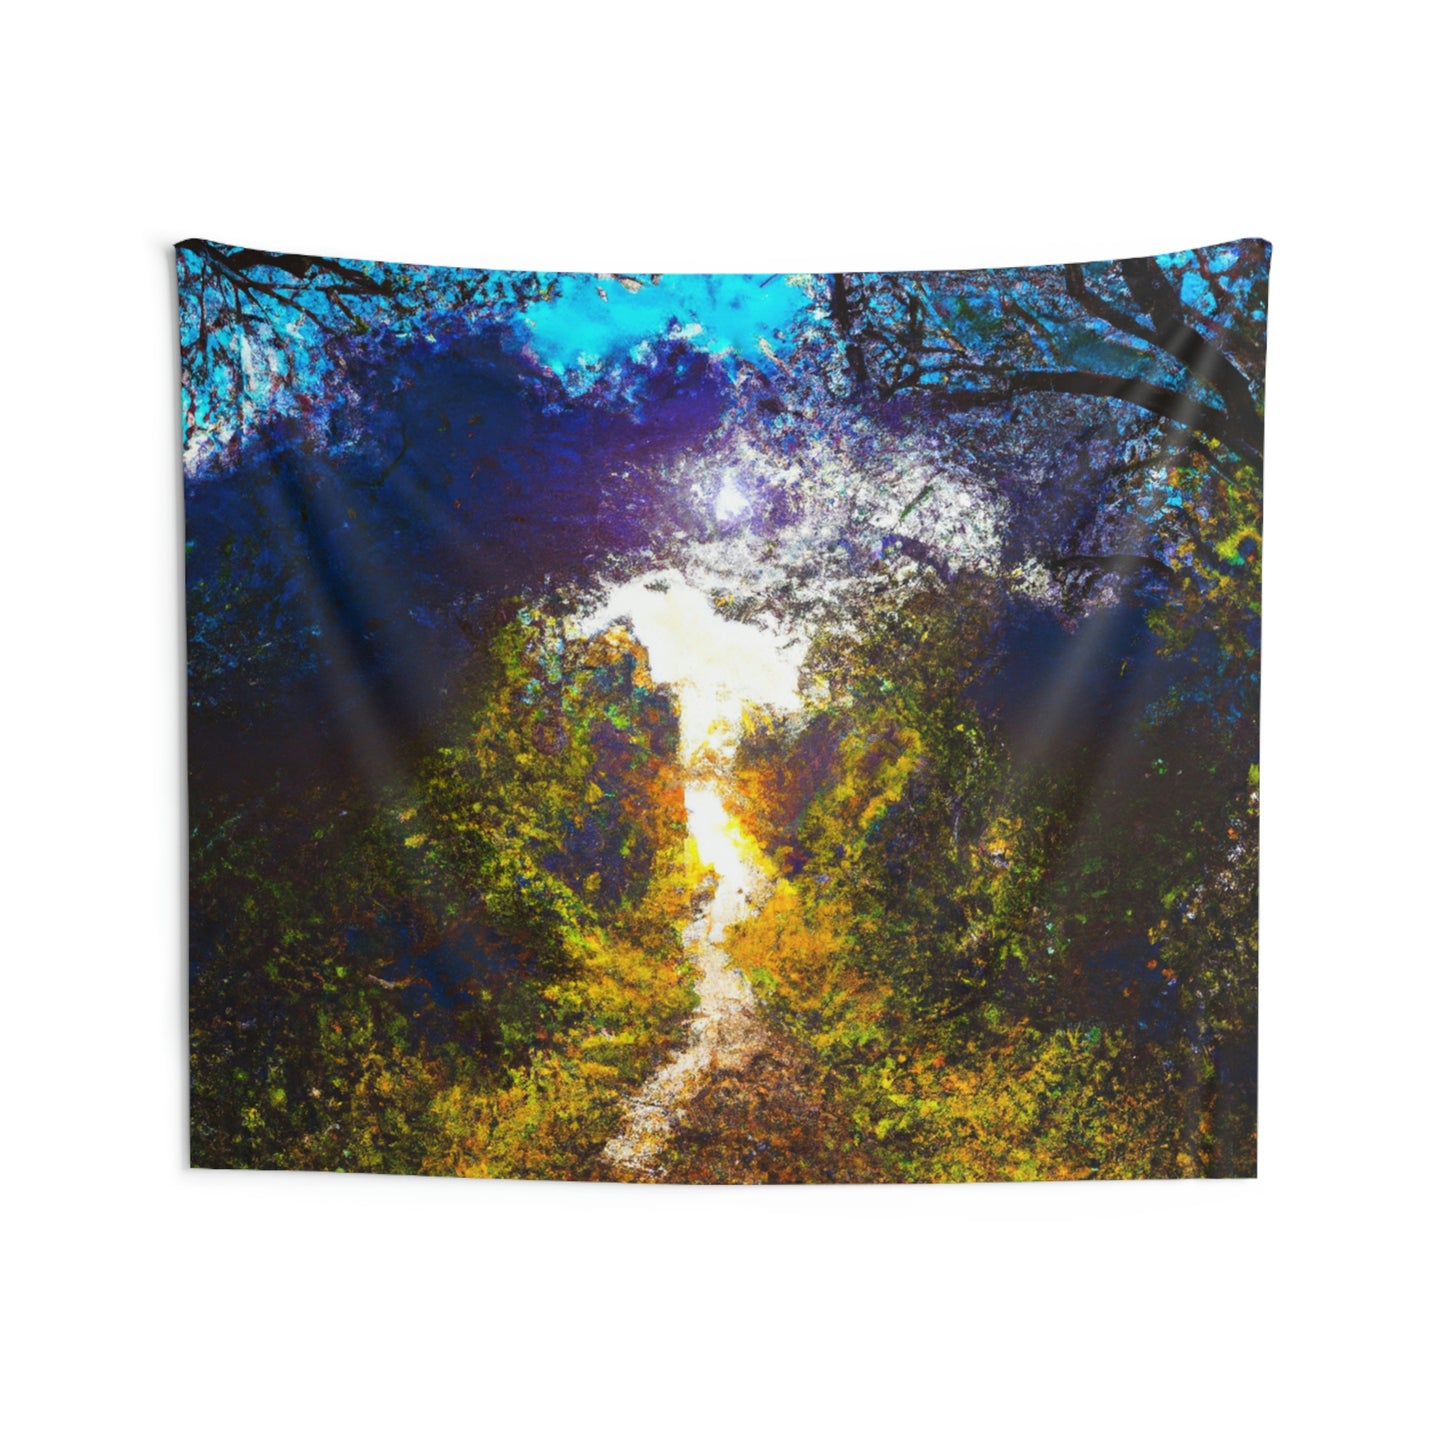 "A Beam of Light on a Forgotten Path" - The Alien Wall Tapestries